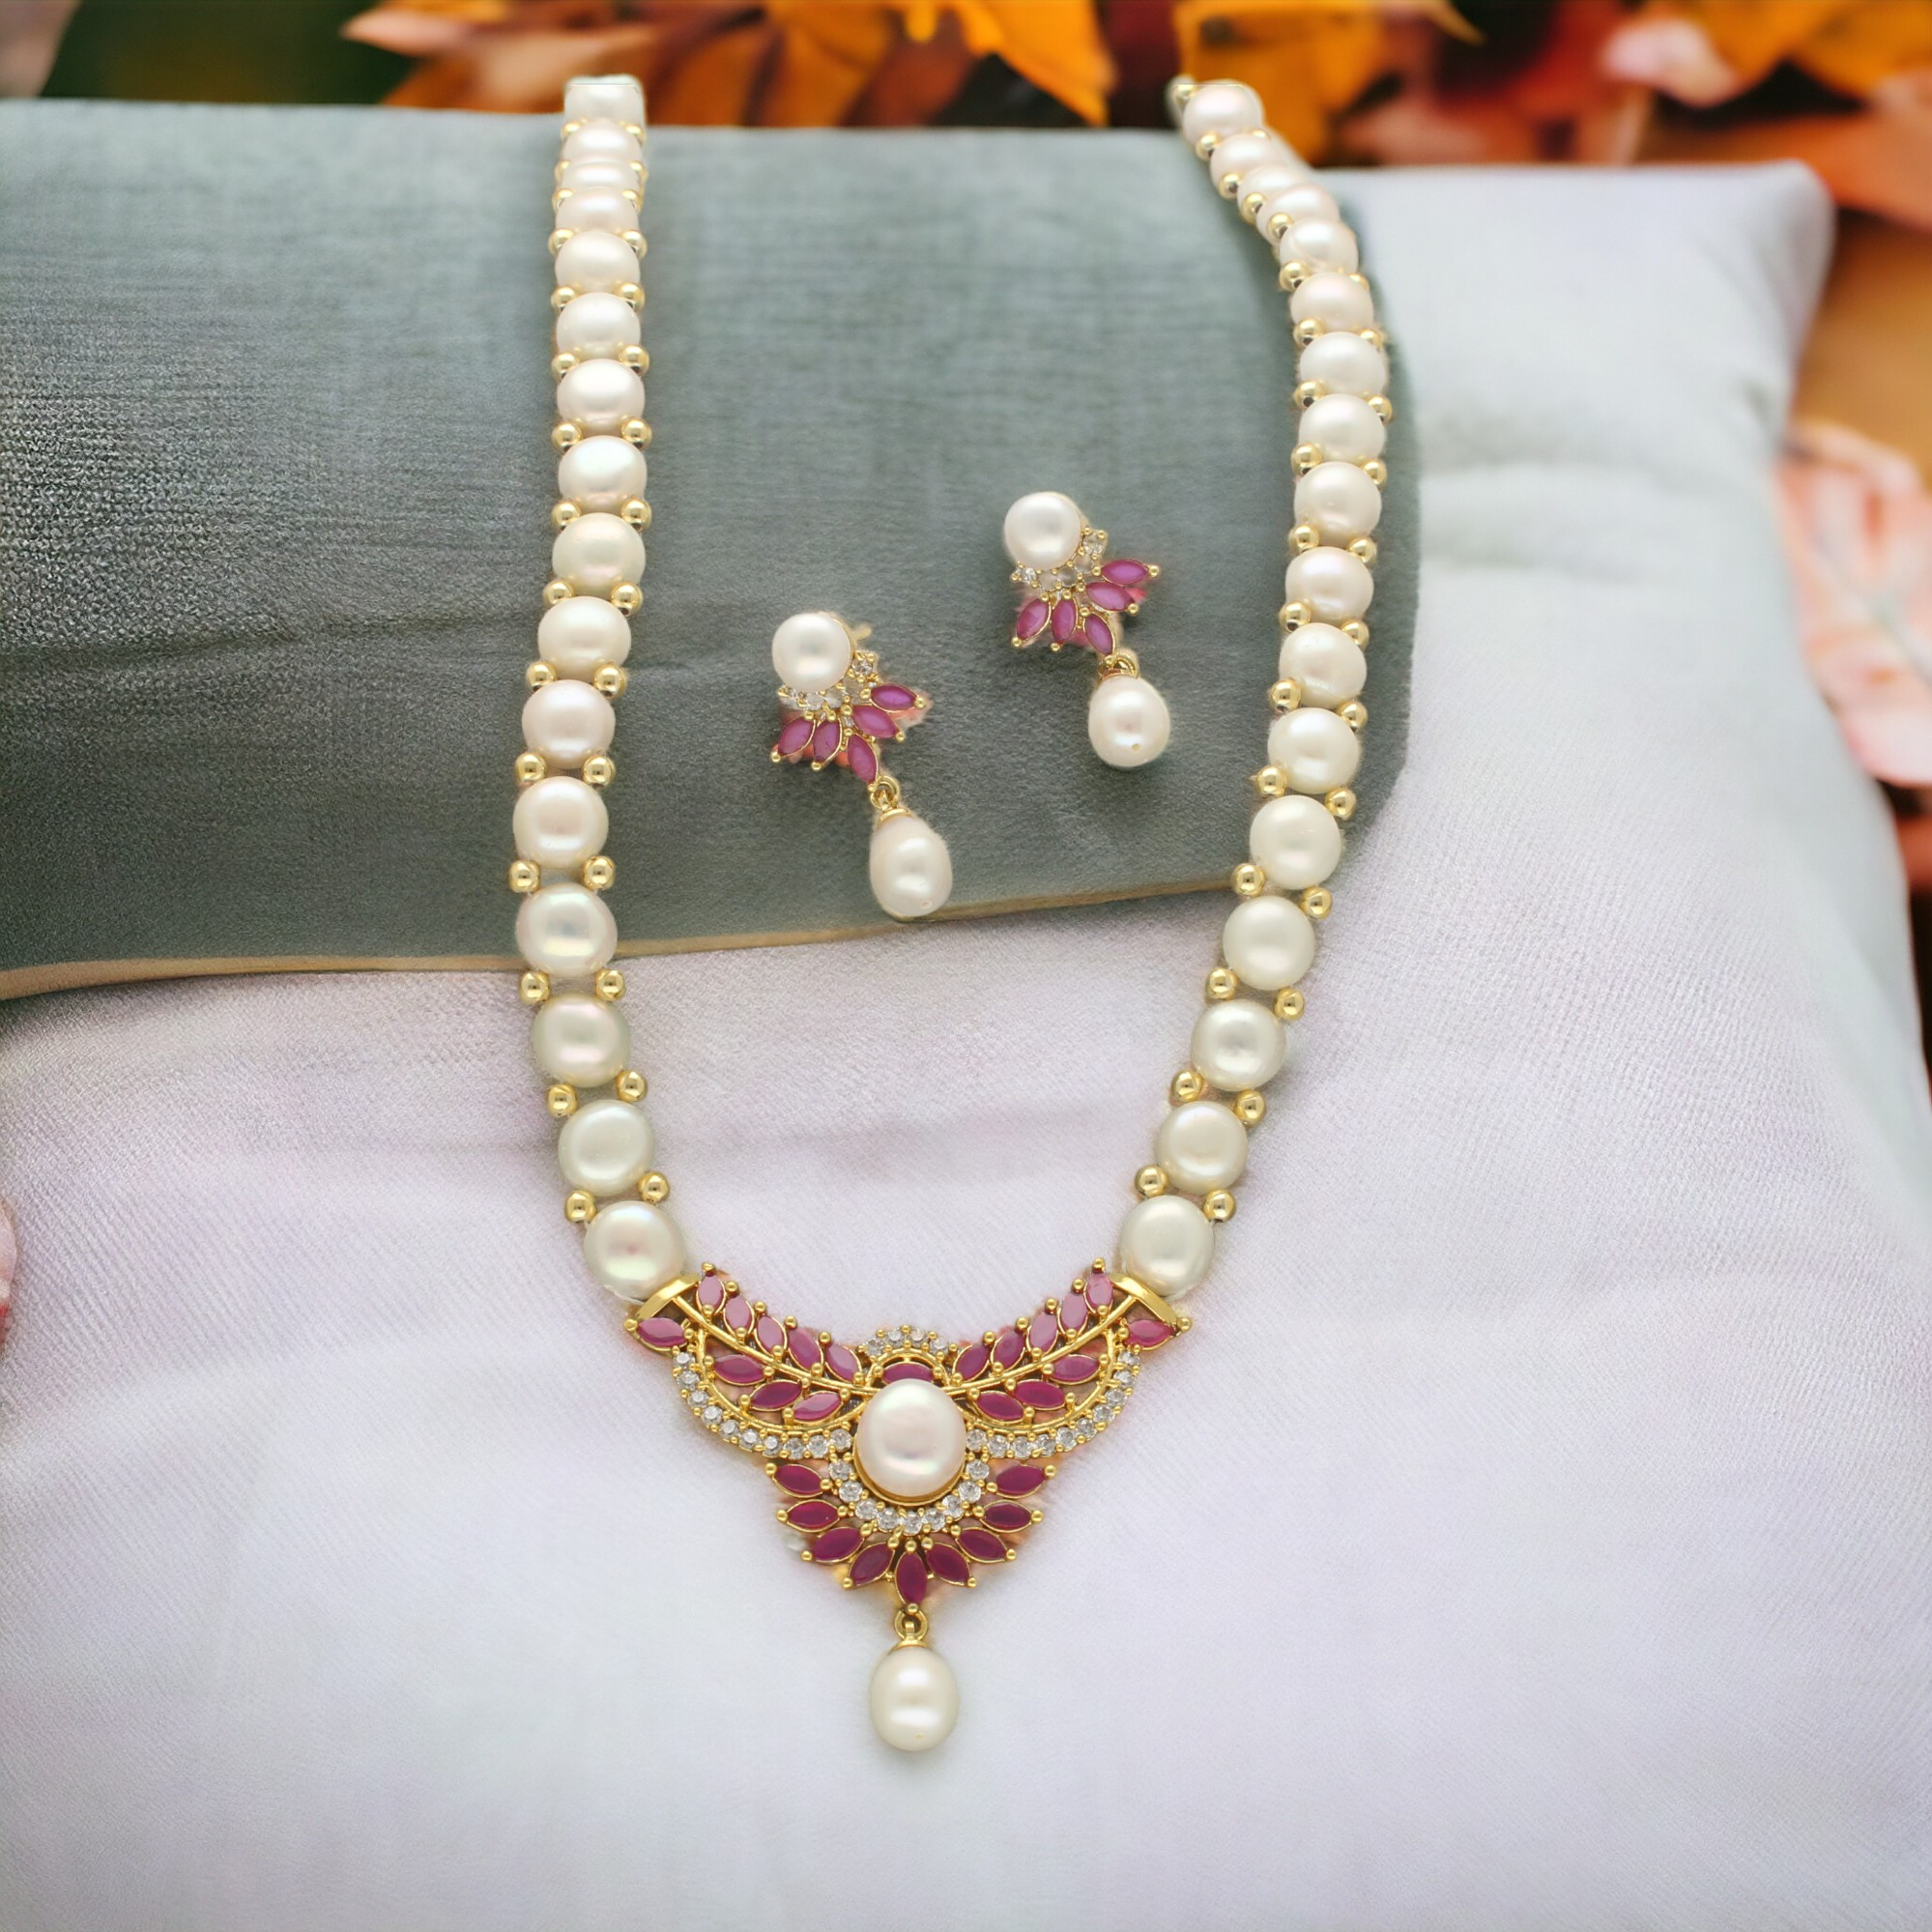 Colorful Pearl Necklace - Trendy Gifts for Her by Talisa